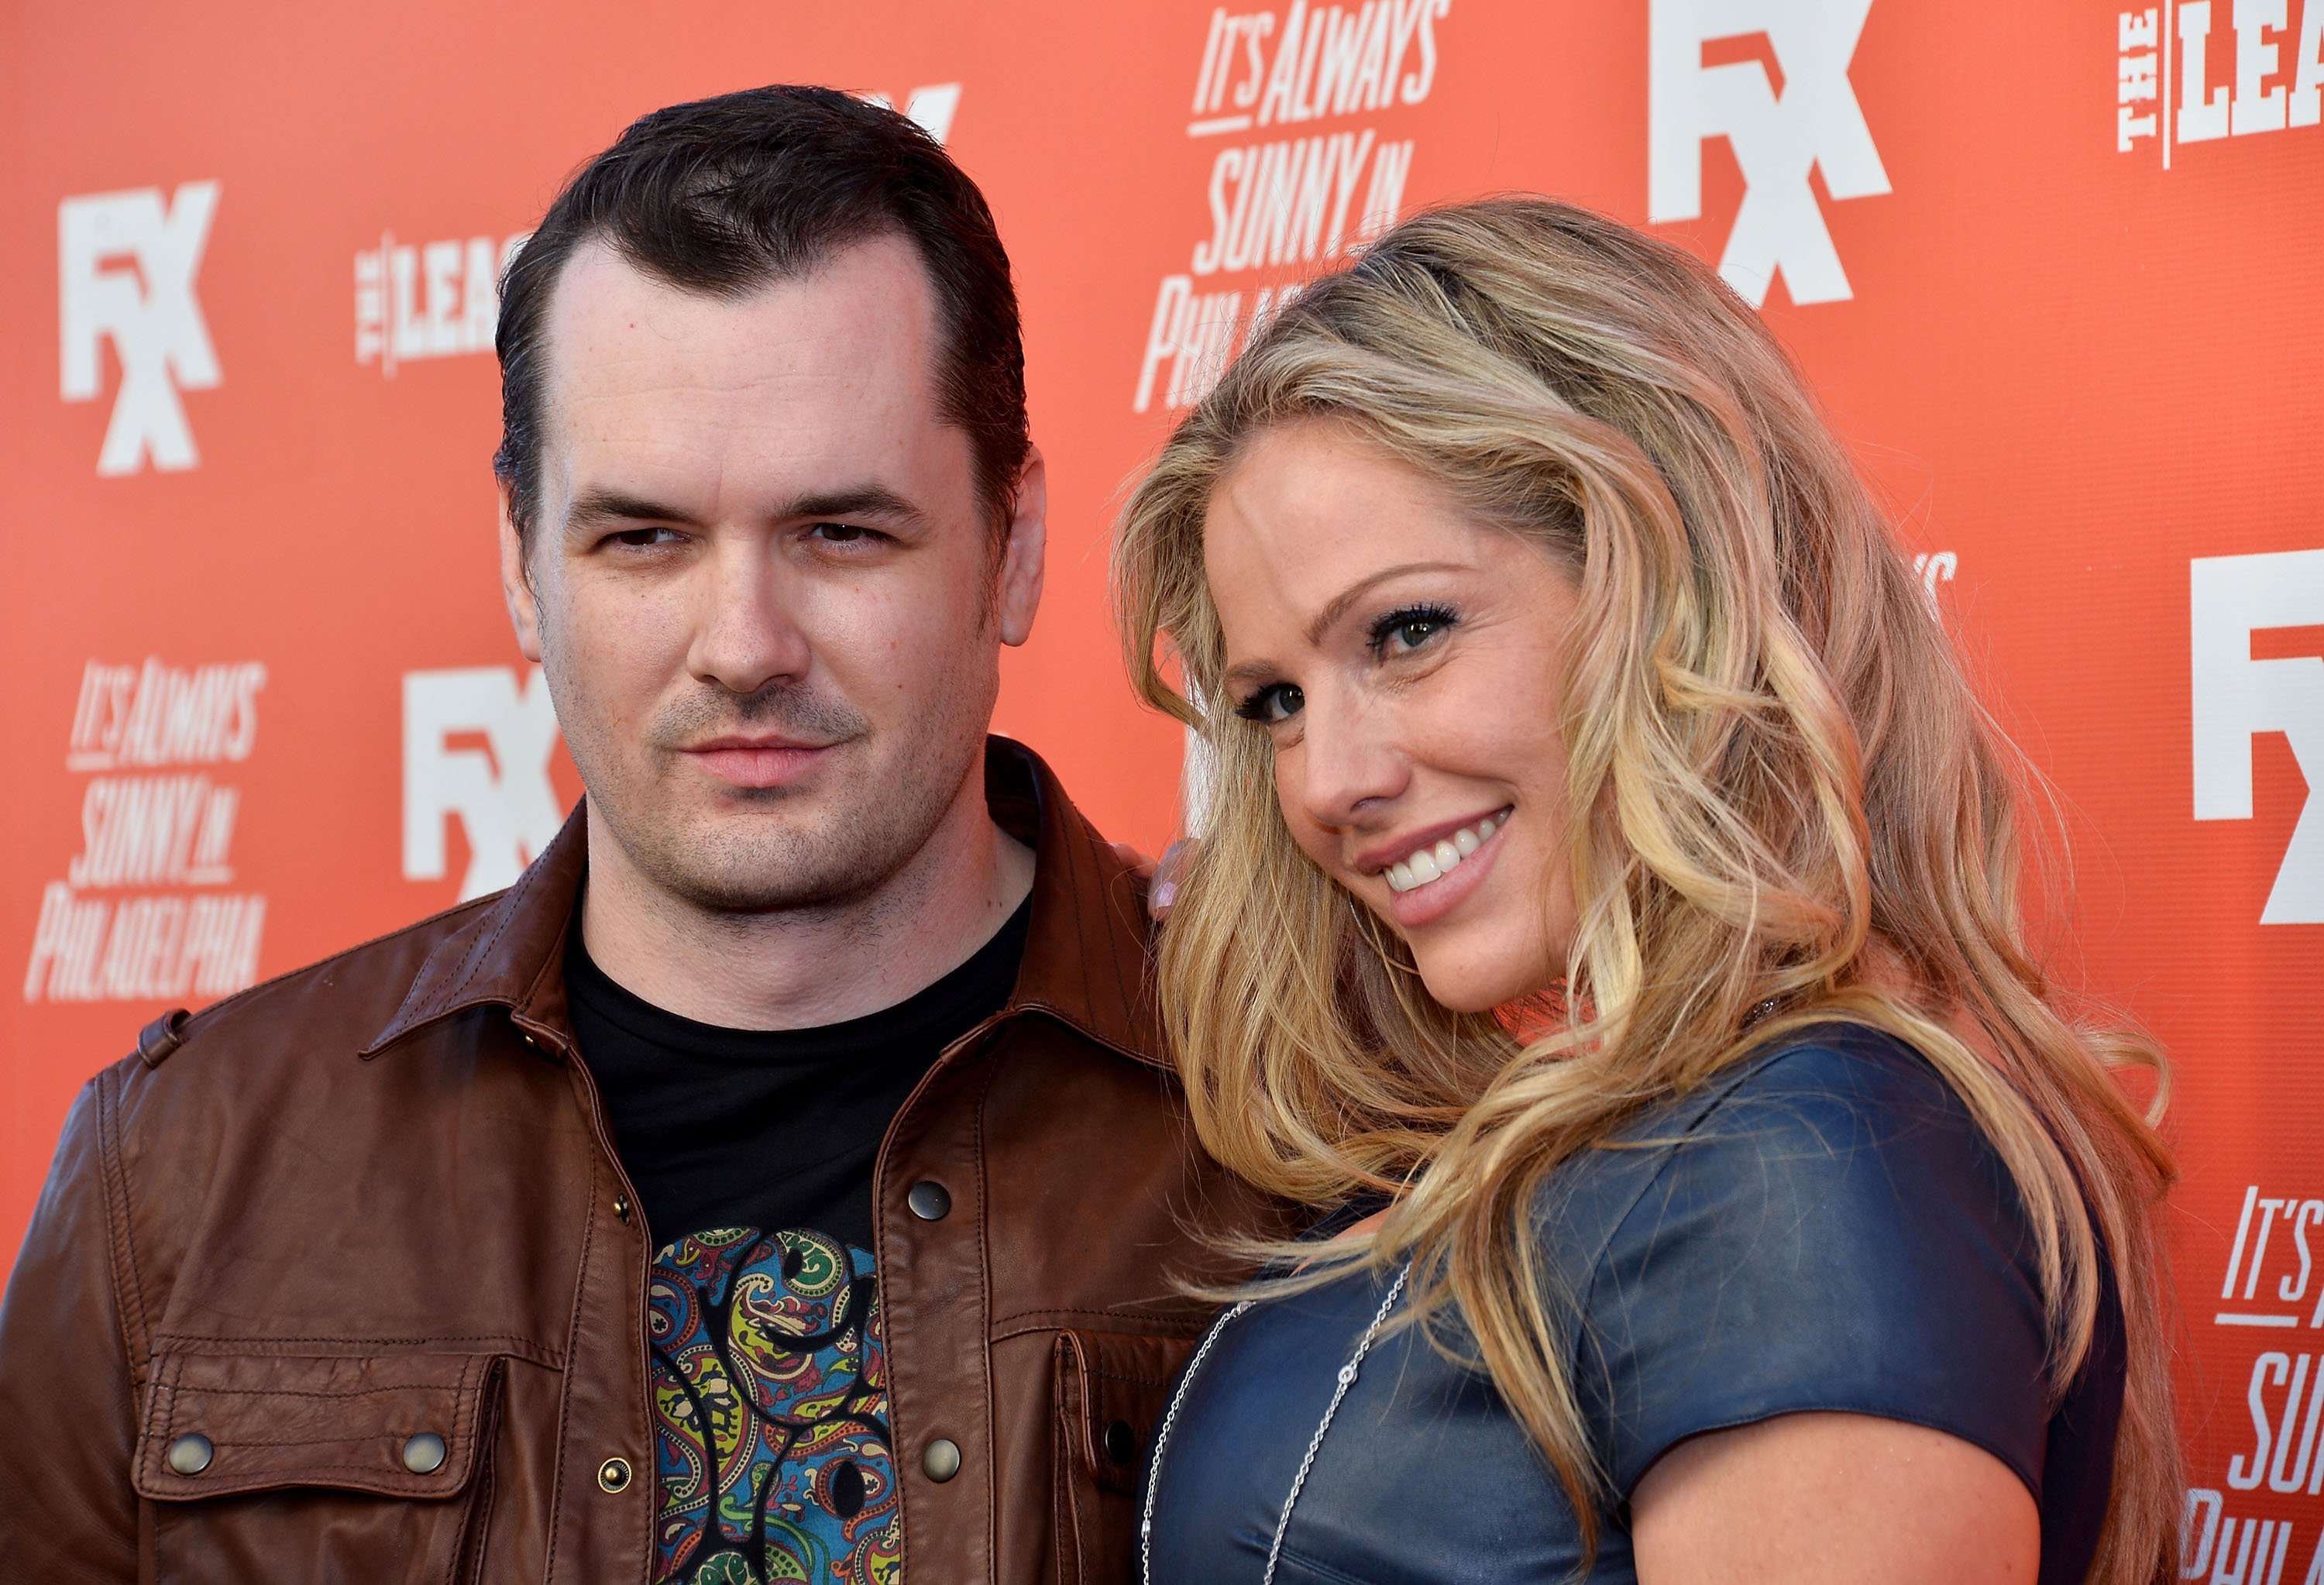 Jim Jeffries and actress Kate Luyben are pictured as they arrive at the FXX Network launch party featuring the season premieres of "It's Always Sunny In Philadelphia" and "The League" at Lure on September 3, 2013, in Hollywood, California | Source: Getty Images